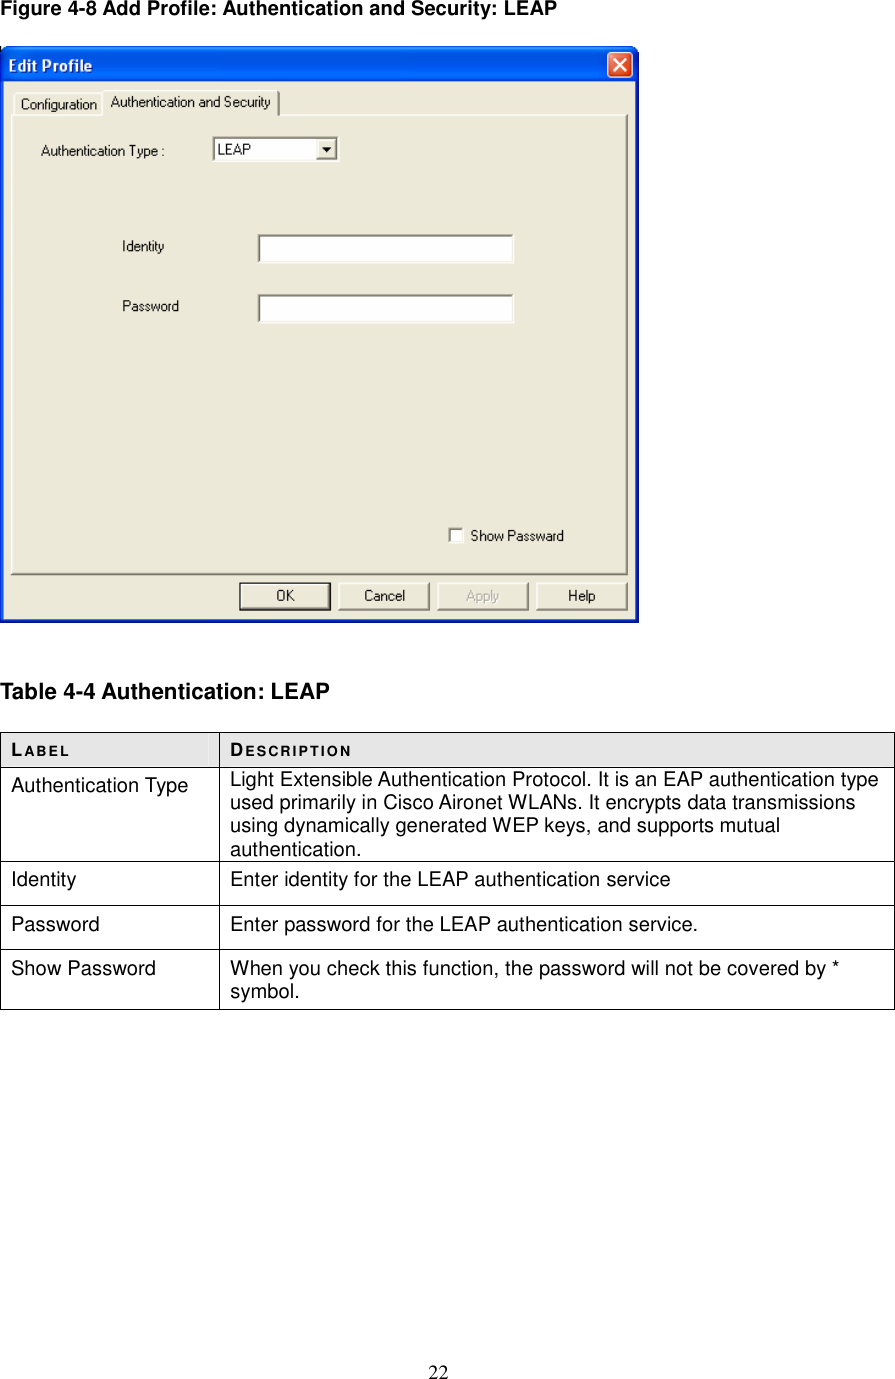  22 Figure 4-8 Add Profile: Authentication and Security: LEAP     Table 4-4 Authentication: LEAP  LABE L DE S CR IP T IO N Authentication Type  Light Extensible Authentication Protocol. It is an EAP authentication type used primarily in Cisco Aironet WLANs. It encrypts data transmissions using dynamically generated WEP keys, and supports mutual authentication. Identity  Enter identity for the LEAP authentication service Password  Enter password for the LEAP authentication service. Show Password  When you check this function, the password will not be covered by * symbol.           